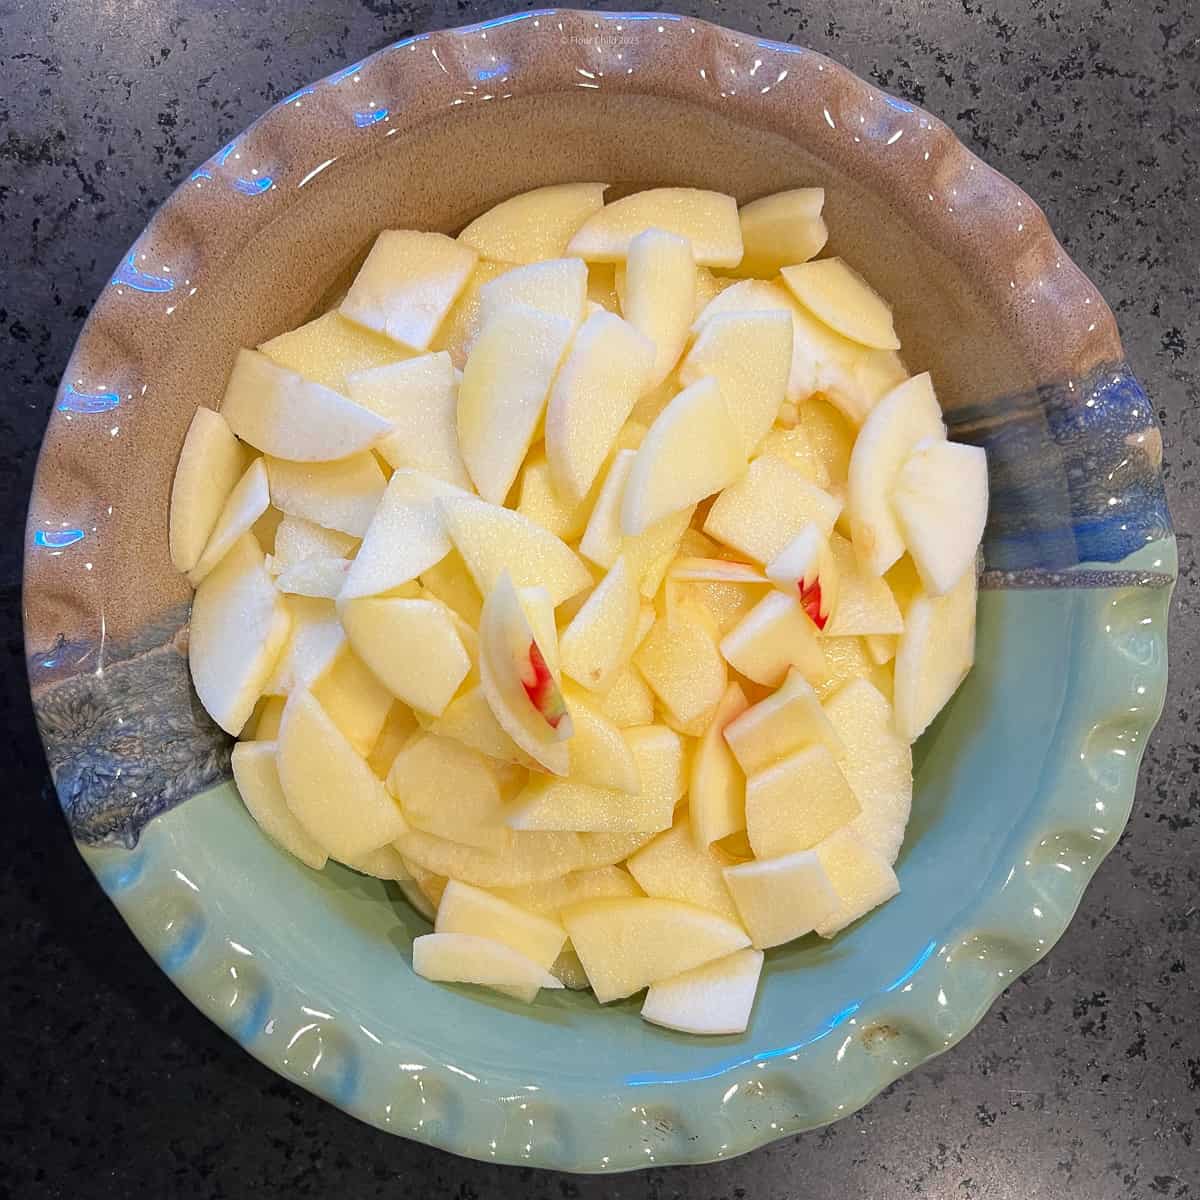 Three peeled and sliced apples in the bottom of a pie dish